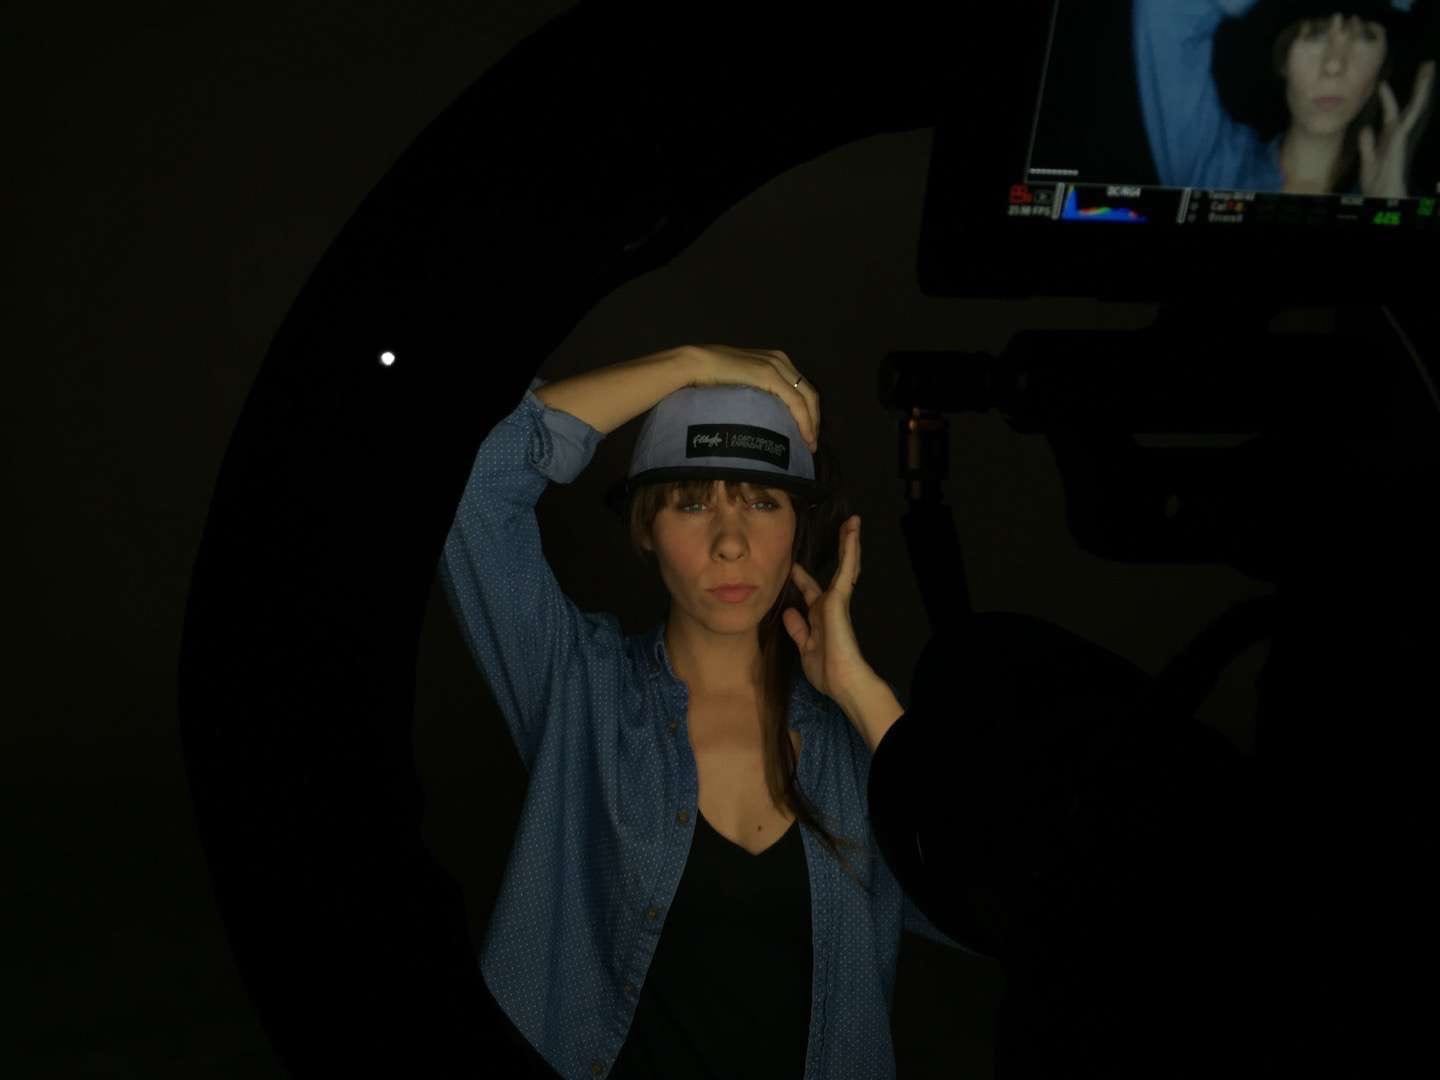 Filibuster Apparel Woman with long brown hair in a blue shirt wearing a gray hat with black rim with video display in foreground